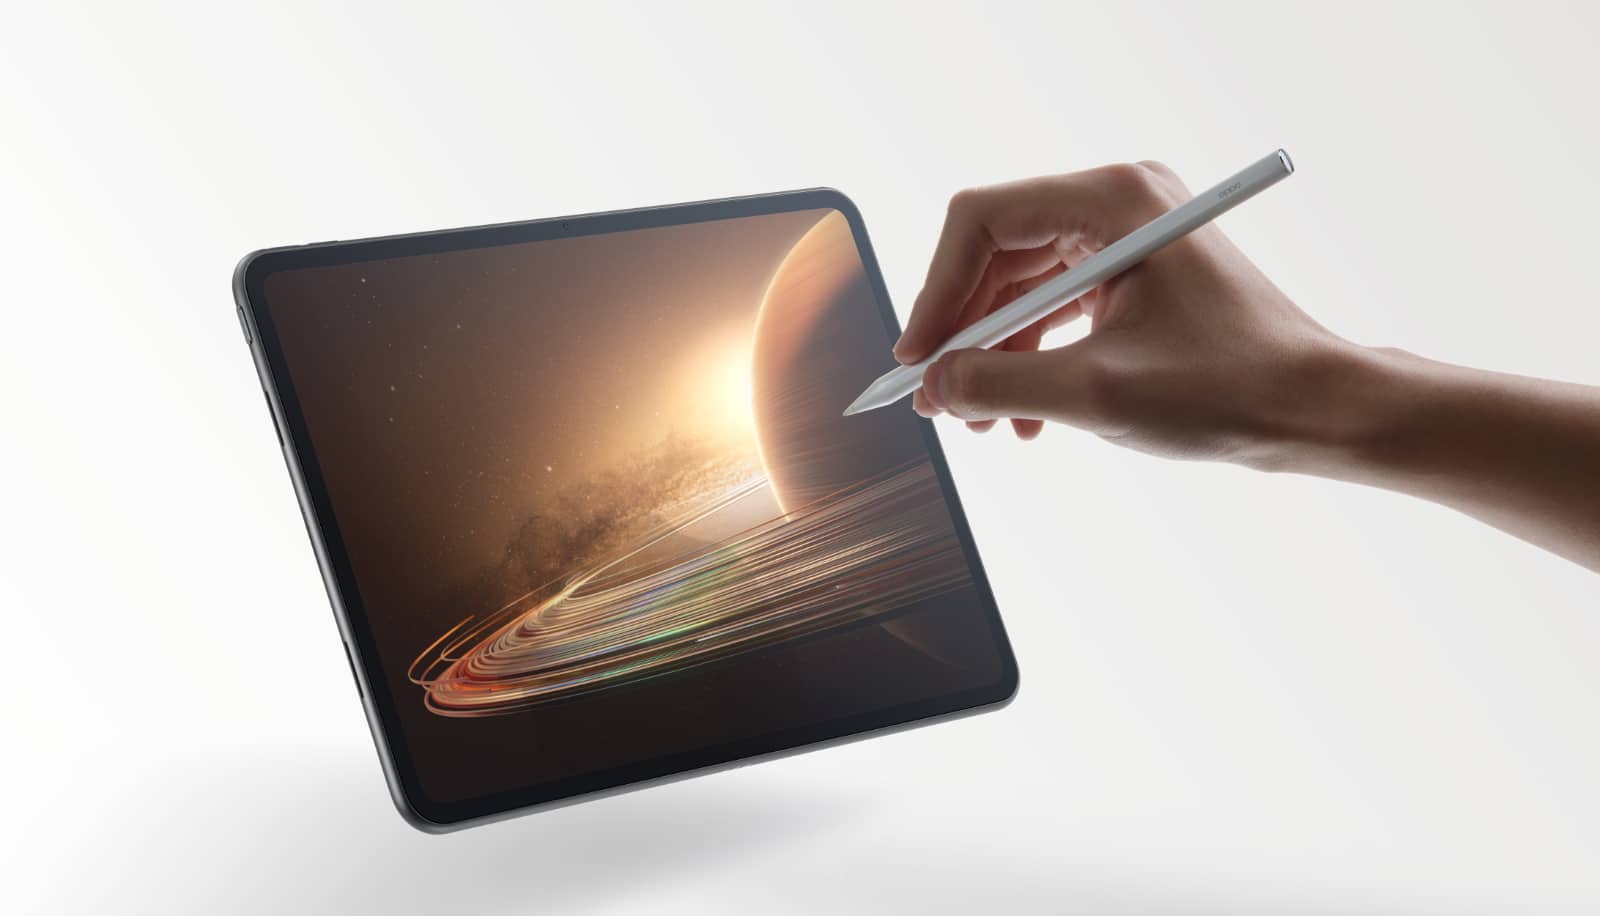 Oppo's Pad 2 is an iPad-inspired tab for $699 – Pickr